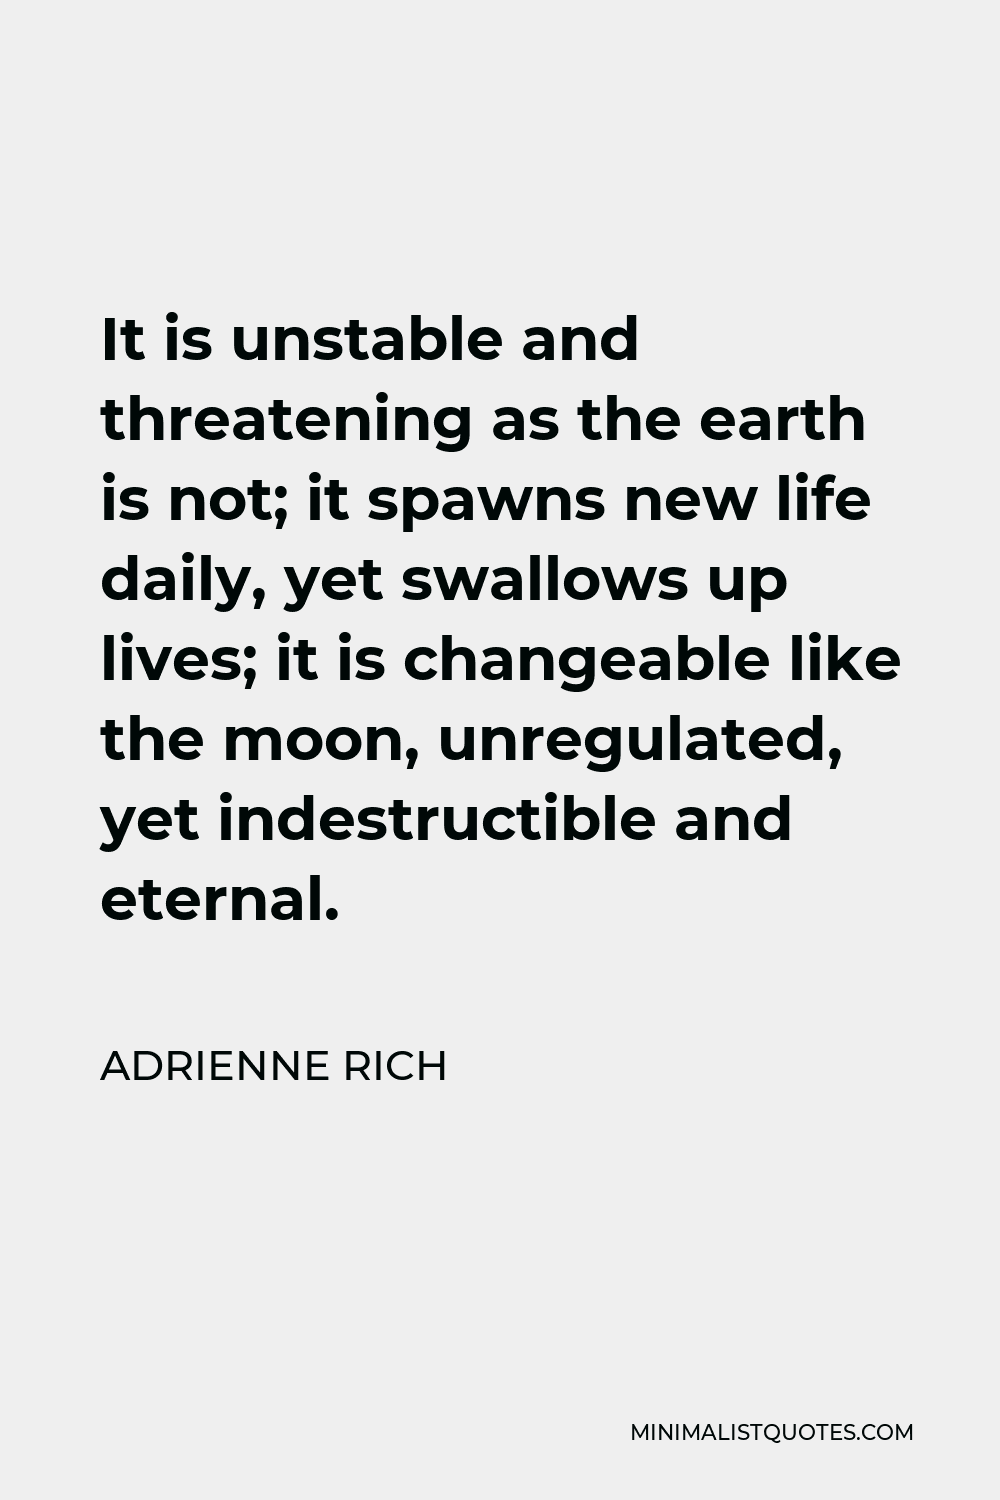 Adrienne Rich Quote - It is unstable and threatening as the earth is not; it spawns new life daily, yet swallows up lives; it is changeable like the moon, unregulated, yet indestructible and eternal.